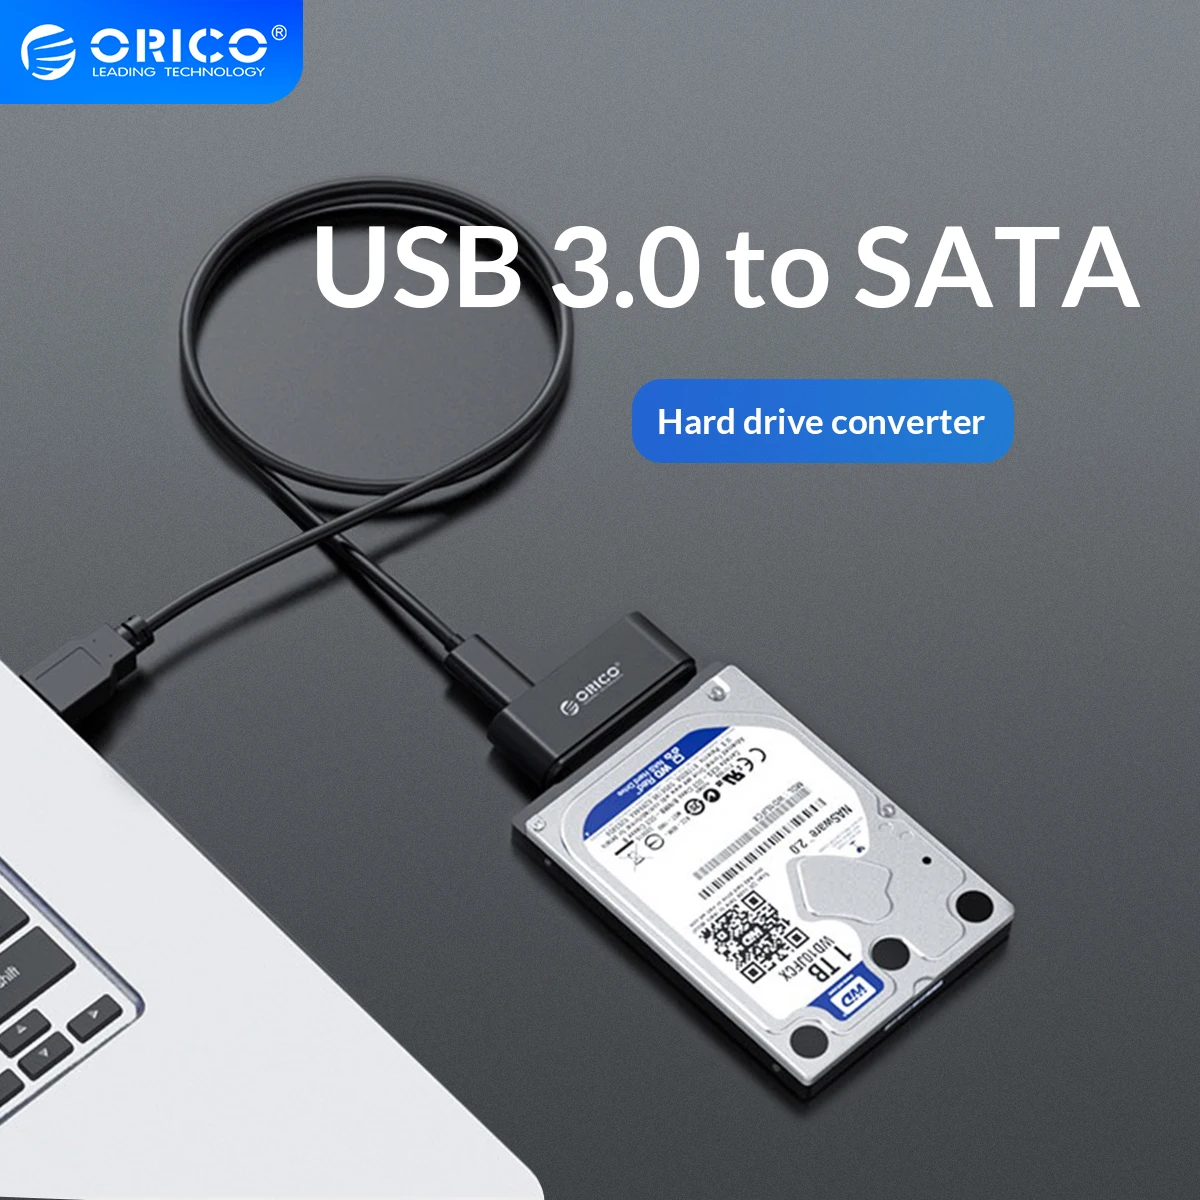 Support UASP & 1 TB Hard Drive ORICO USB 3.0 to SATA III Adapter Cable for 2.5 SSD/HDD Drives SATA to USB 3.0 Converter